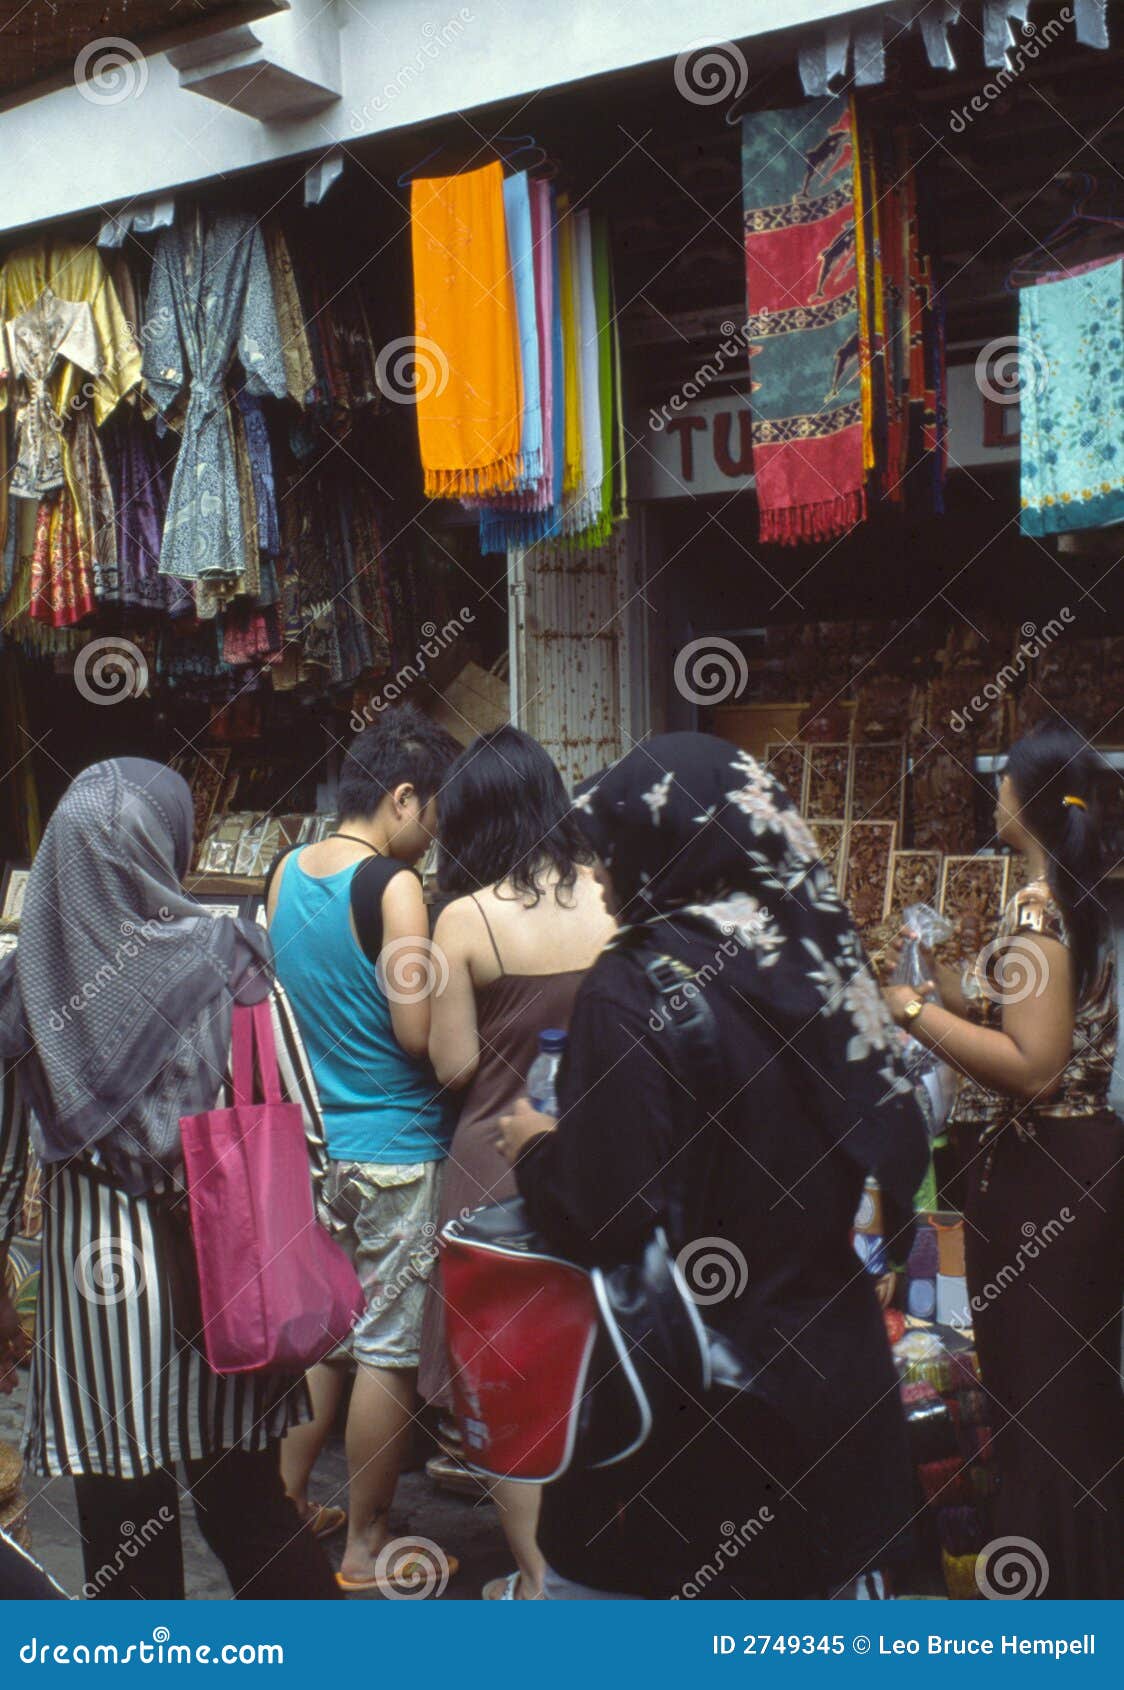 Download this Indonesian Market picture